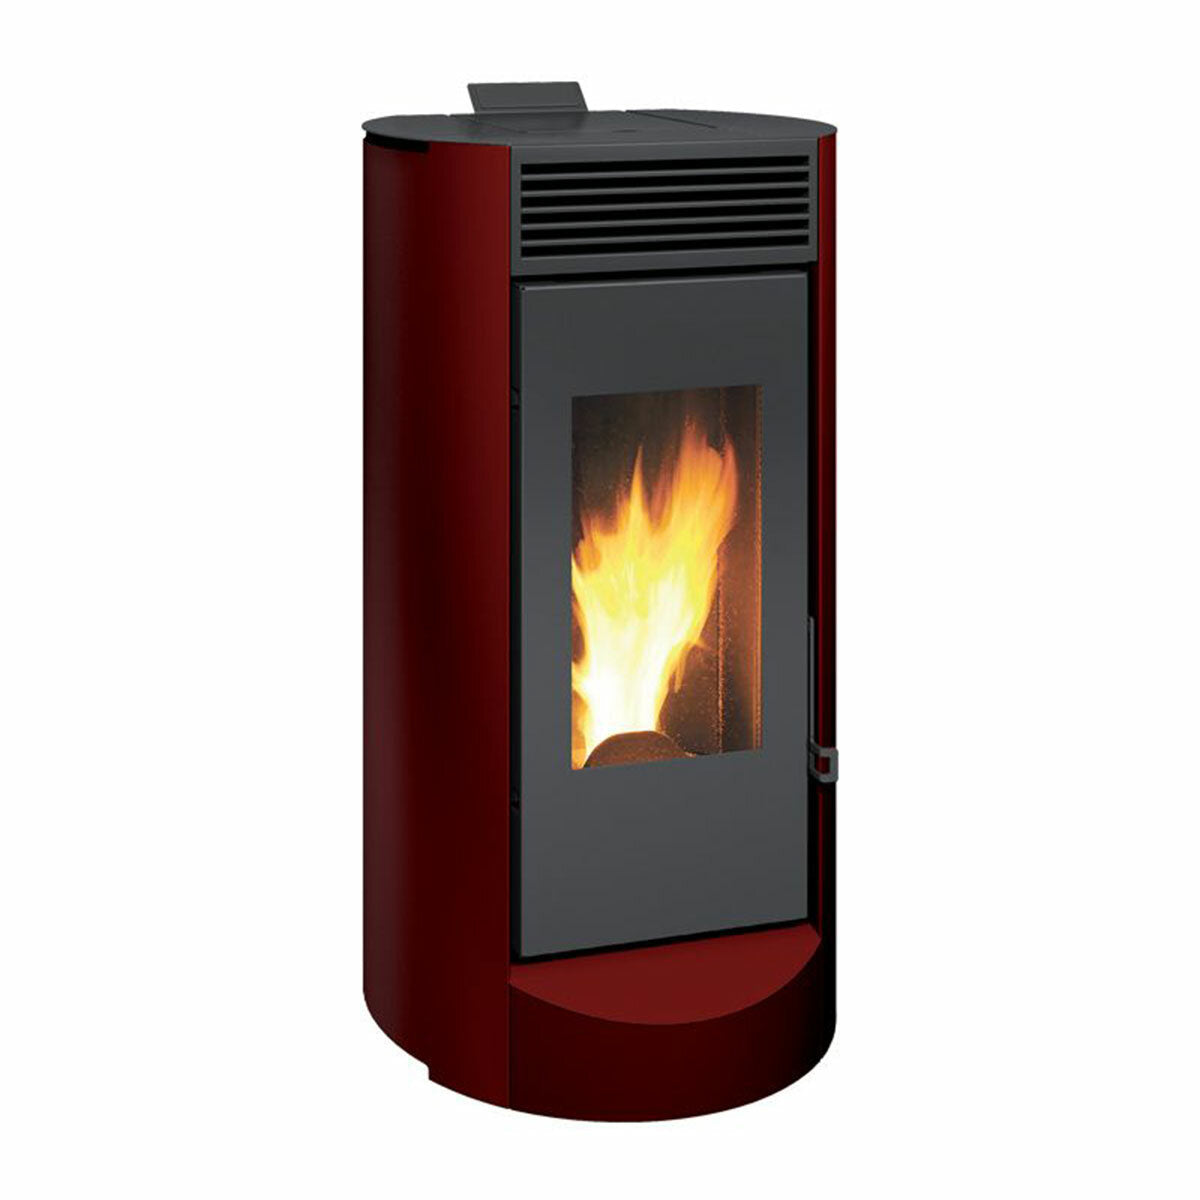 Pellet stove Caminetti Montegrappa Landa 9.5 kW with red ventilated air